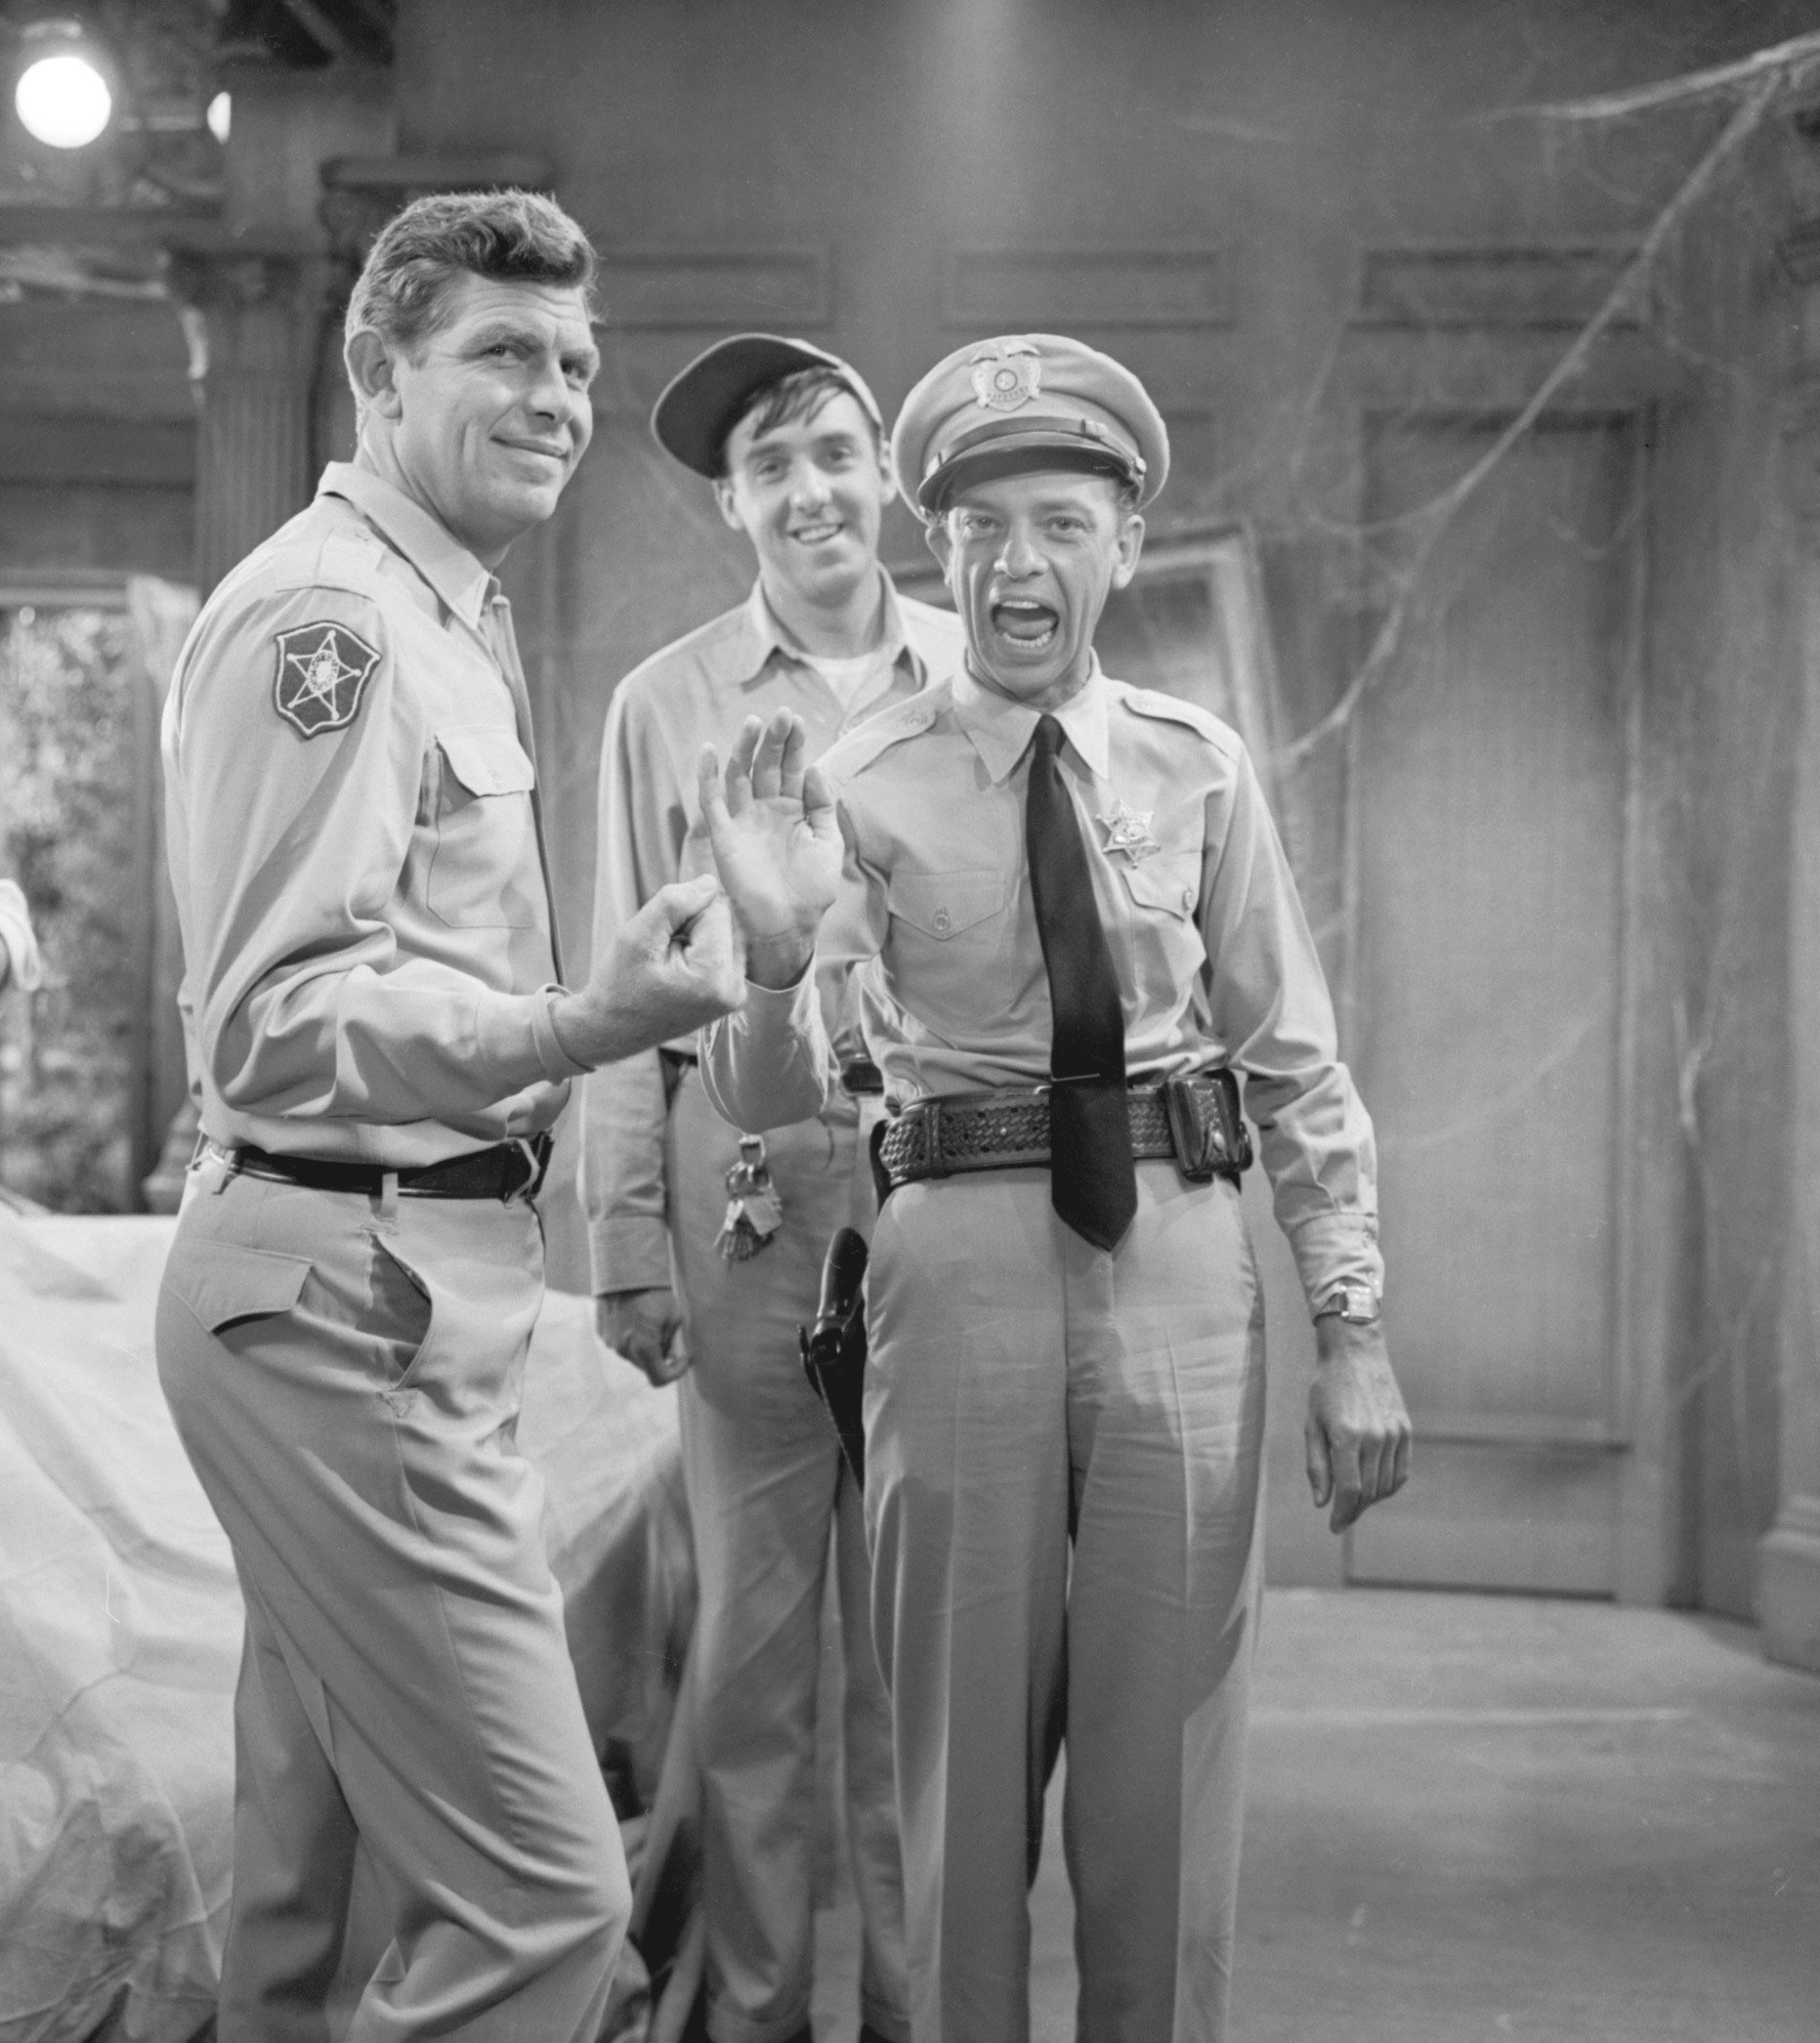 Jim Nabors, center, with Don Knotts and Andy Griffith, 1963